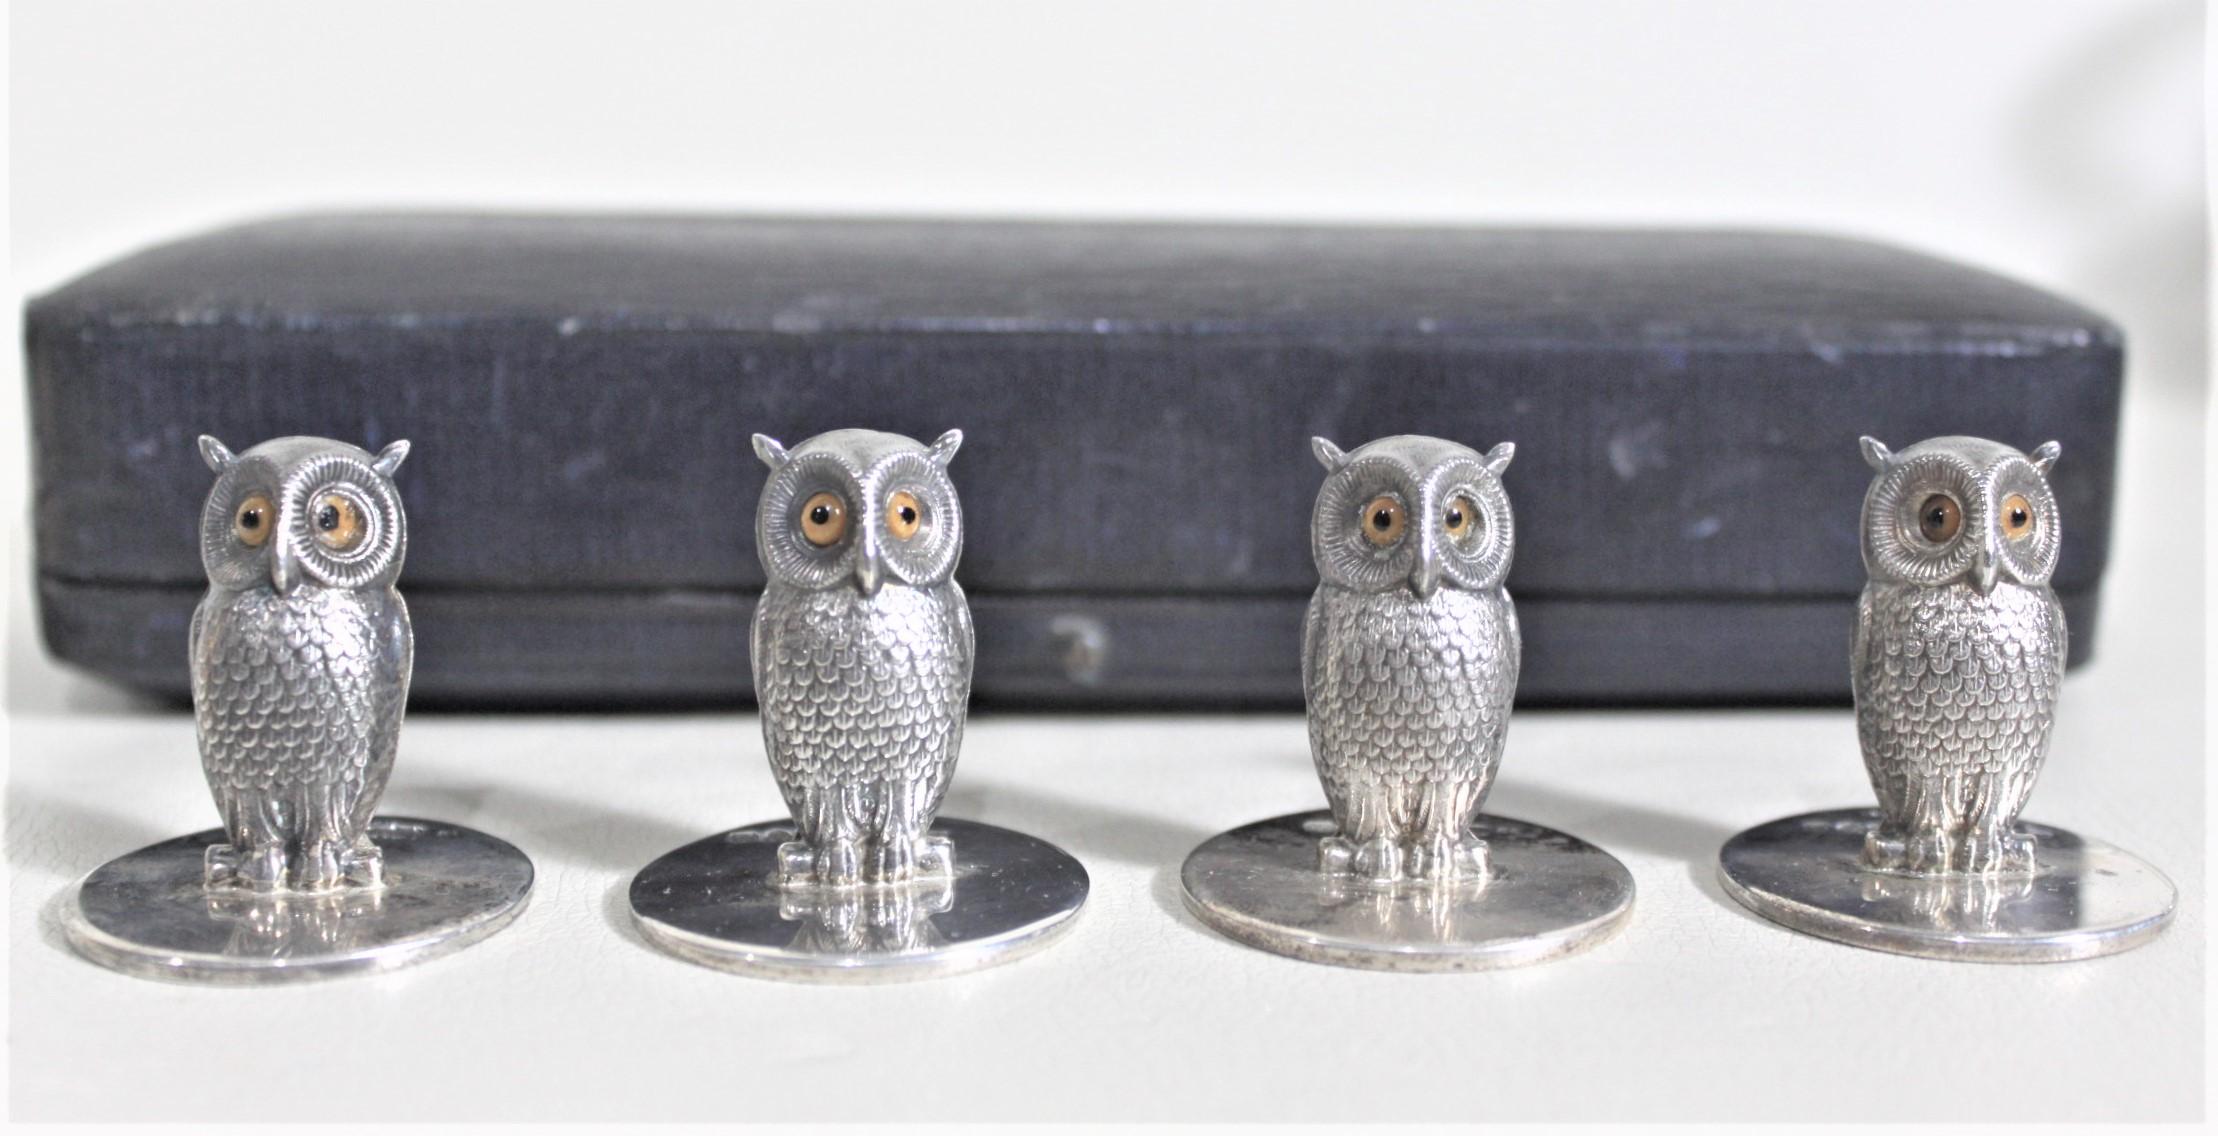 Four Antique Sterling Silver Figural Owl Place Card or Menu Holder Set with Box 6